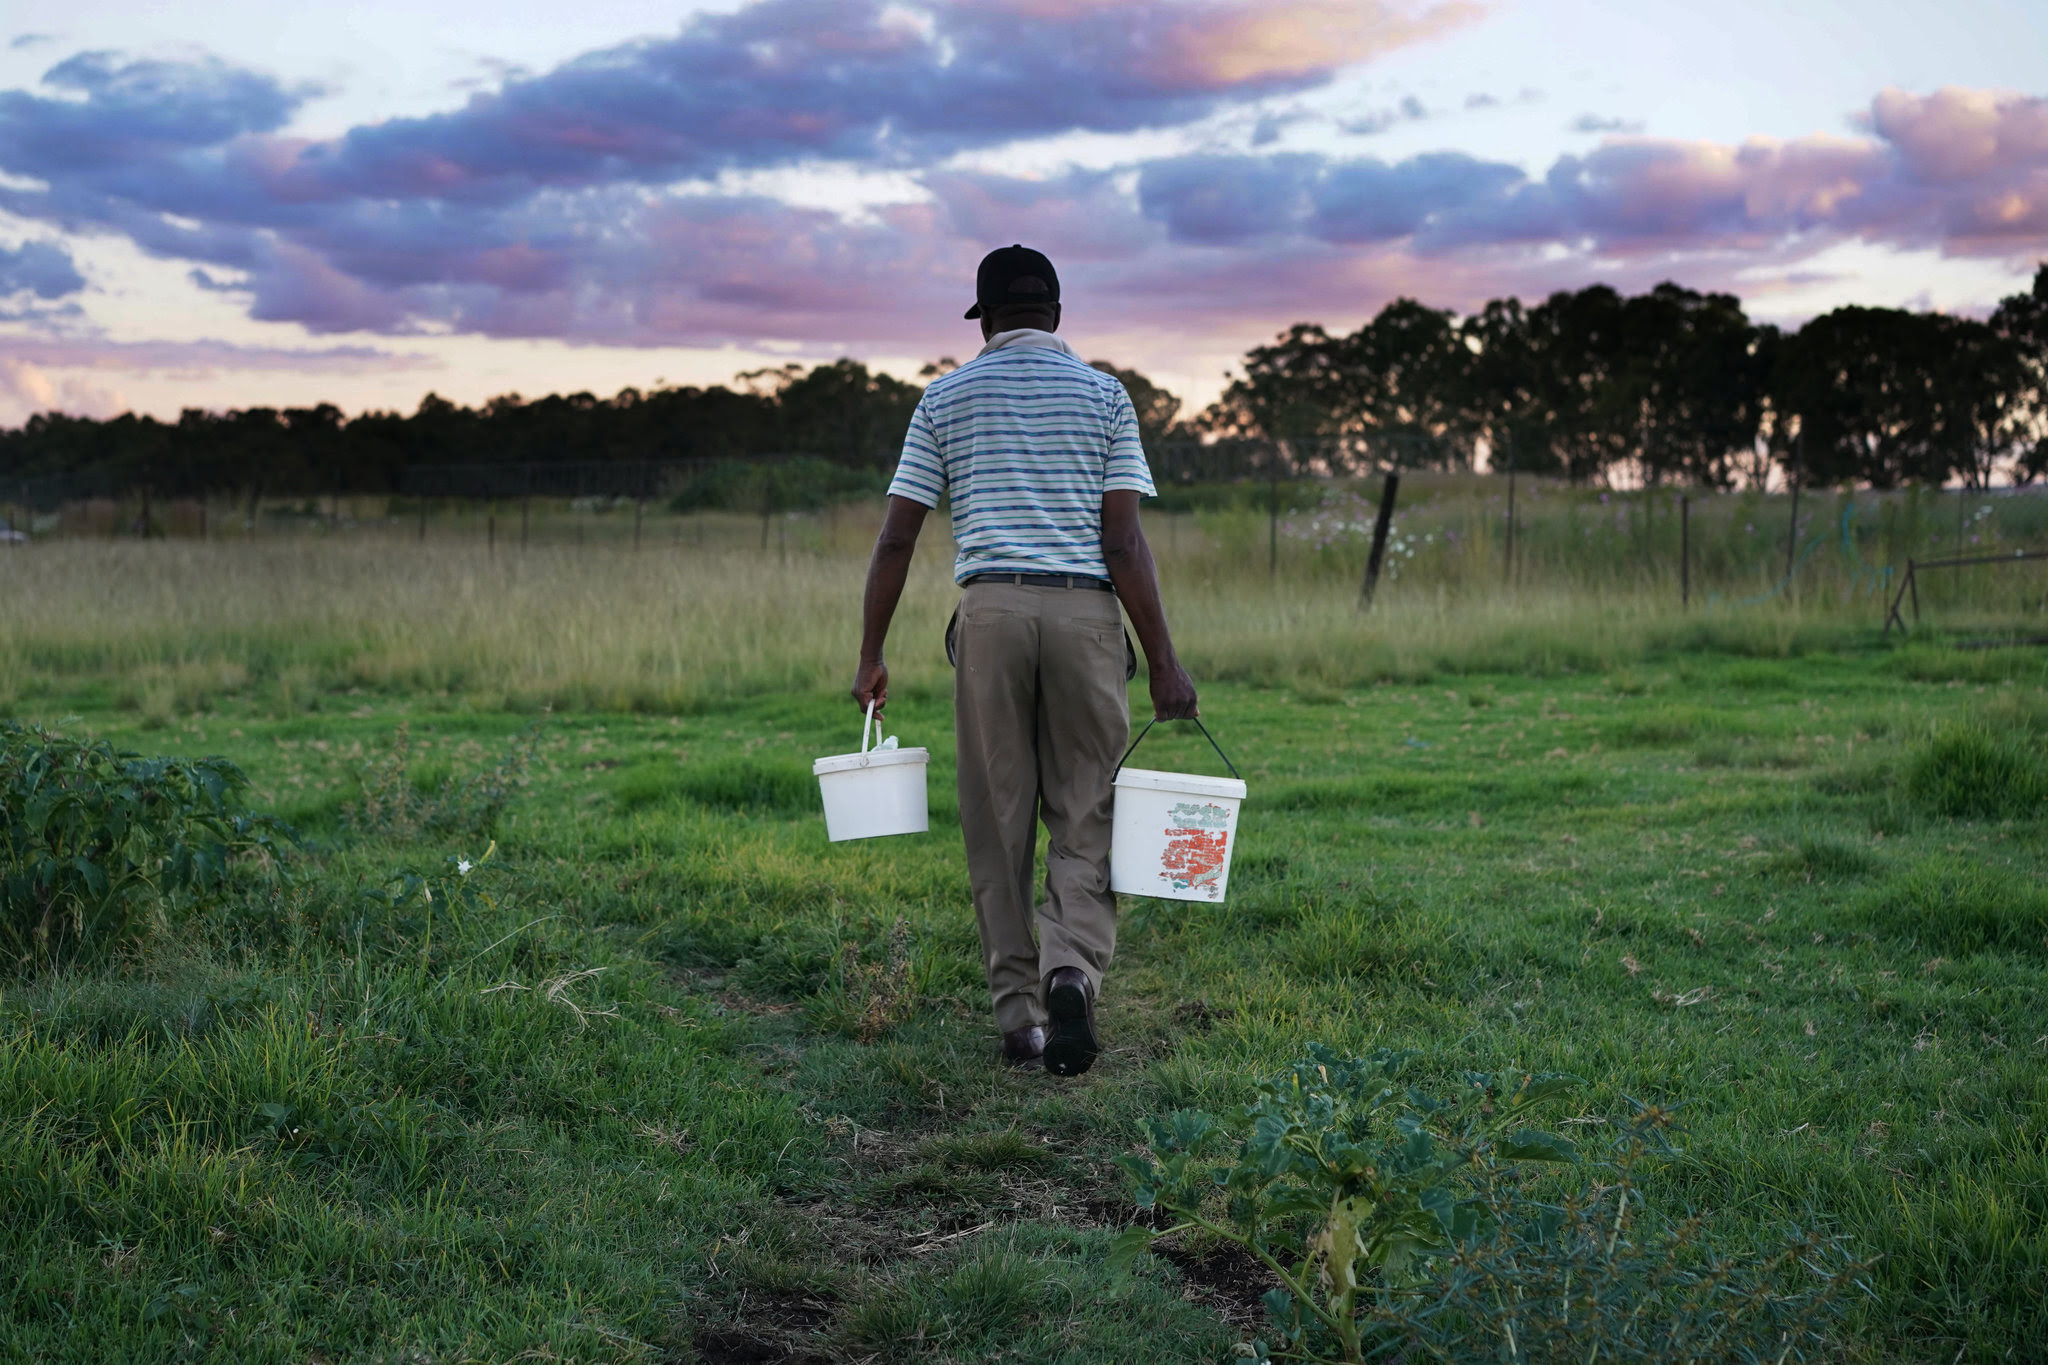 Meshack Ncongwane recalled that local farmers thought their “lives were going to change” when a local man rose to head the province’s agriculture ministry. Credit Joao Silva/The New York Times 